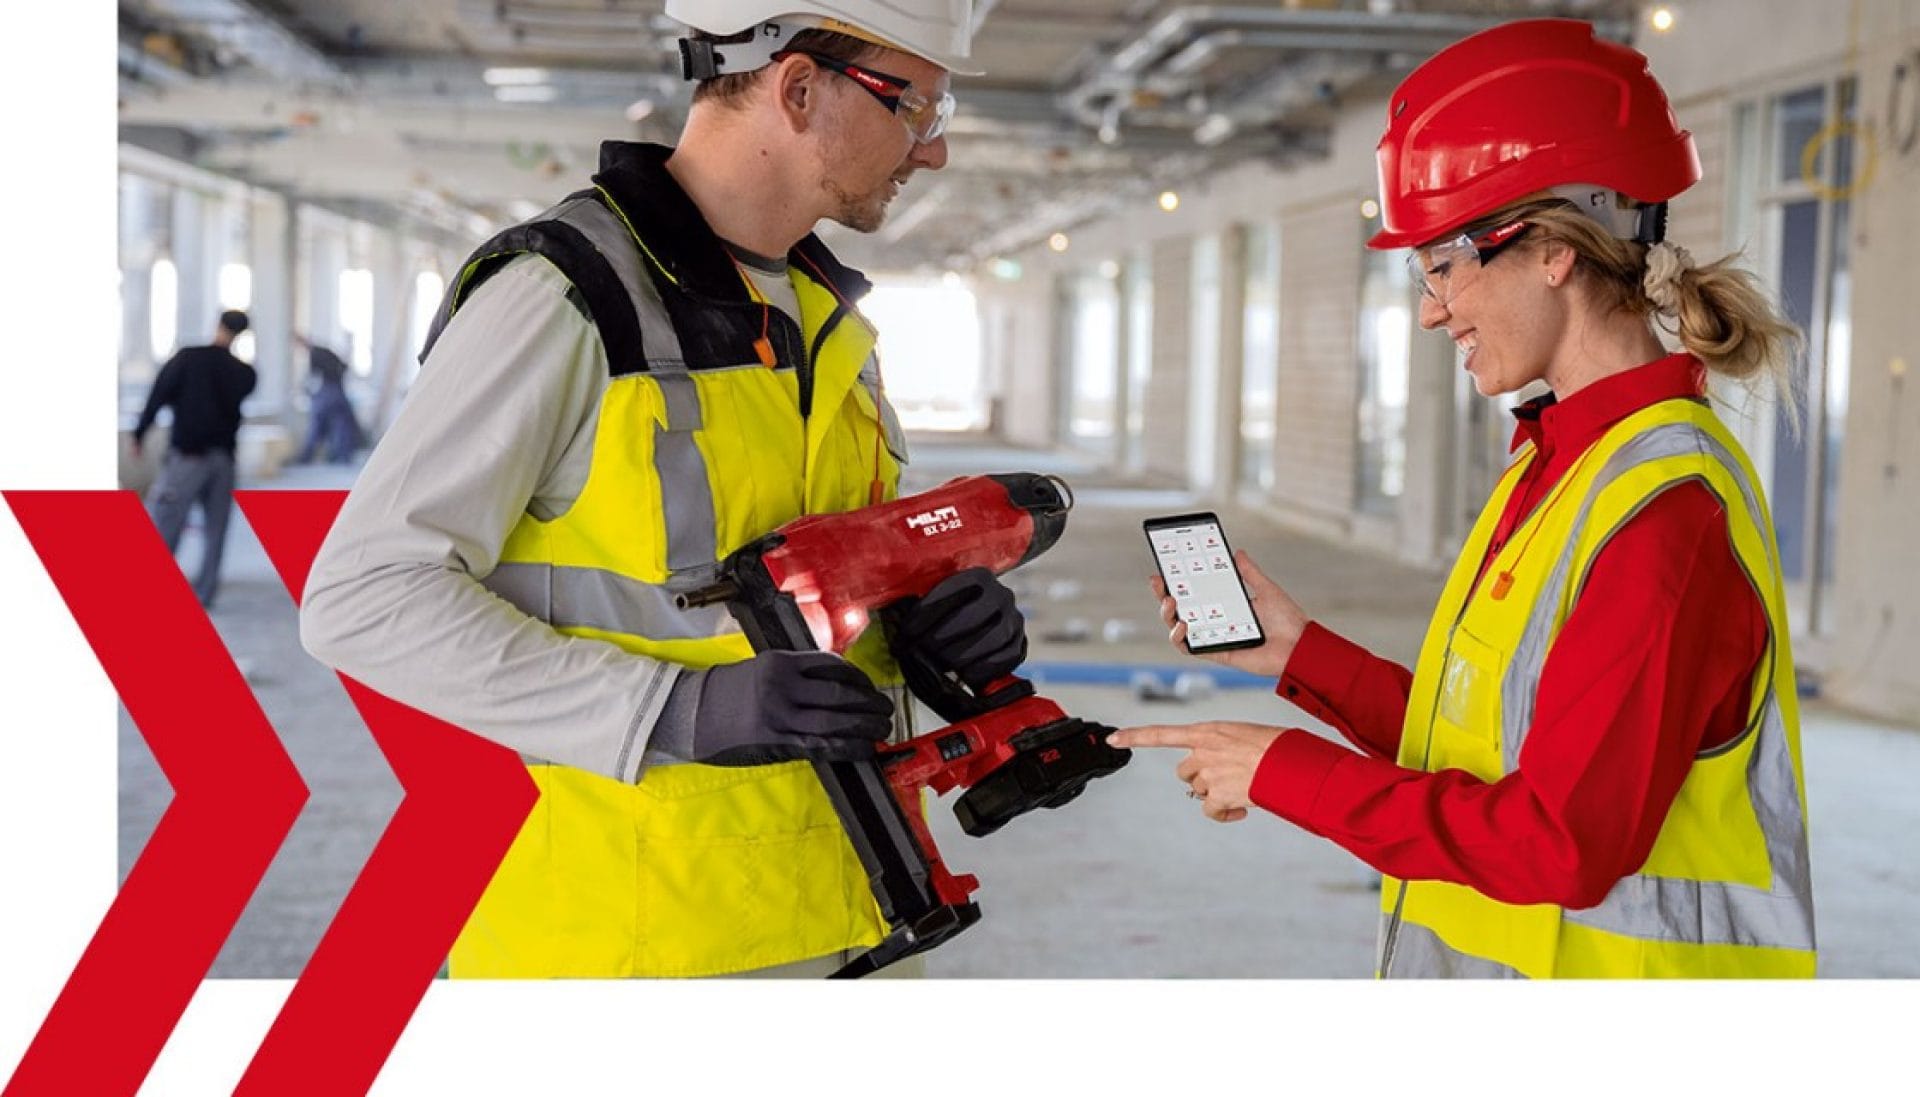 A Hilti employee demonstrates the Nuron services to a customer using the BX 3-22 charger base